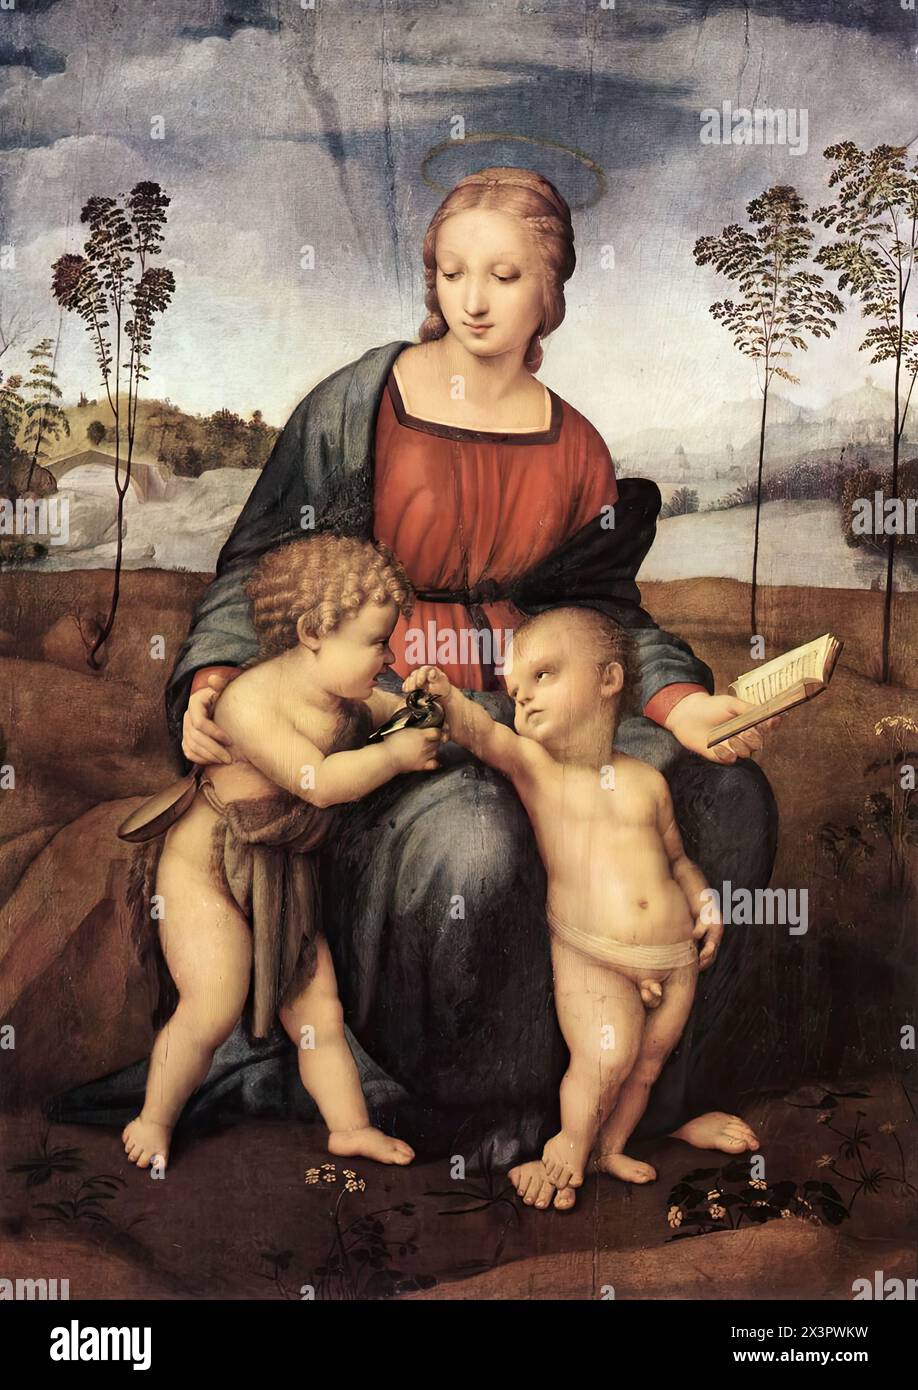 RAFFAELLO Sanzio (b. 1483, Urbino, d. 1520, Roma)  Madonna del Cardellino 1507 Oil on wood, 107 x 77 cm Galleria degli Uffizi, Florence  The Madonna of the Goldfinch, one of Raphael's Florentine panels, was painted by Raphael for the marriage of his friend Lorenzo Nasi and Sandra di Matteo di Giovanni Canigiani. It was severely damaged following the partial collapse of the Nasi house in 1547, as mentioned by Vasari. It was subsequently restored by Ridolfo del Ghirlandaio, the son of the artist who was deeply influenced by Raphael.  The Christ Child is lovingly stroking a goldfinch that the boy Stock Photo